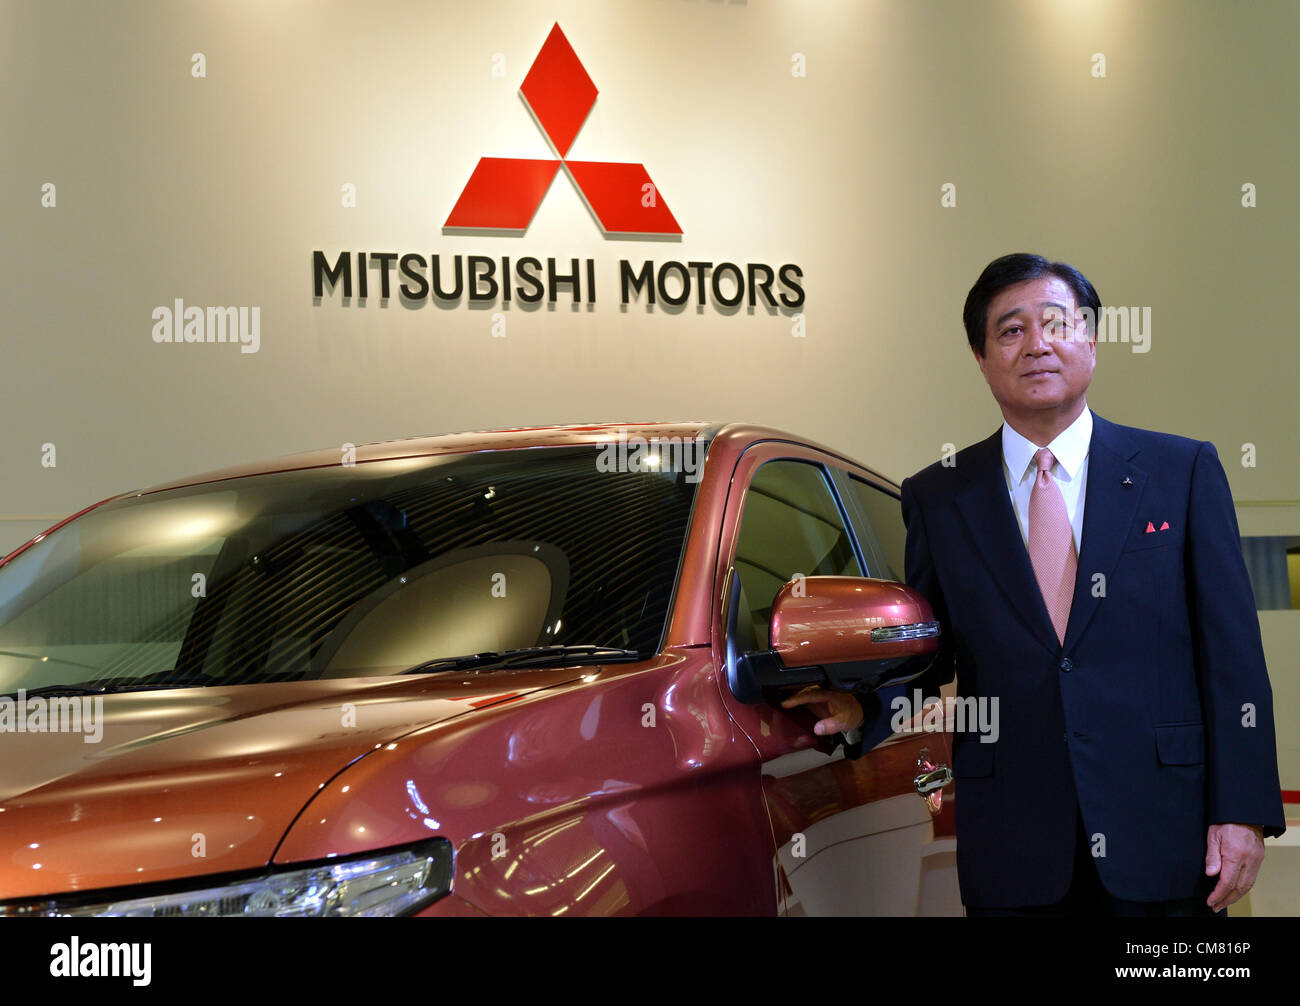 October 25, 2012, Tokyo, Japan - President Osamu Mashiko of Mitsubishi Motors poses with the all new SUV Outlander during a launch at its head office in Tokyo on Thursday, October 25, 2012. The new Outlander comes in a 2.4-liter four-wheel-drive model and a 2.0-liter two-wheel-drive version. (Photo by Natsuki Sakai/AFLO) AYF -mis- Stock Photo